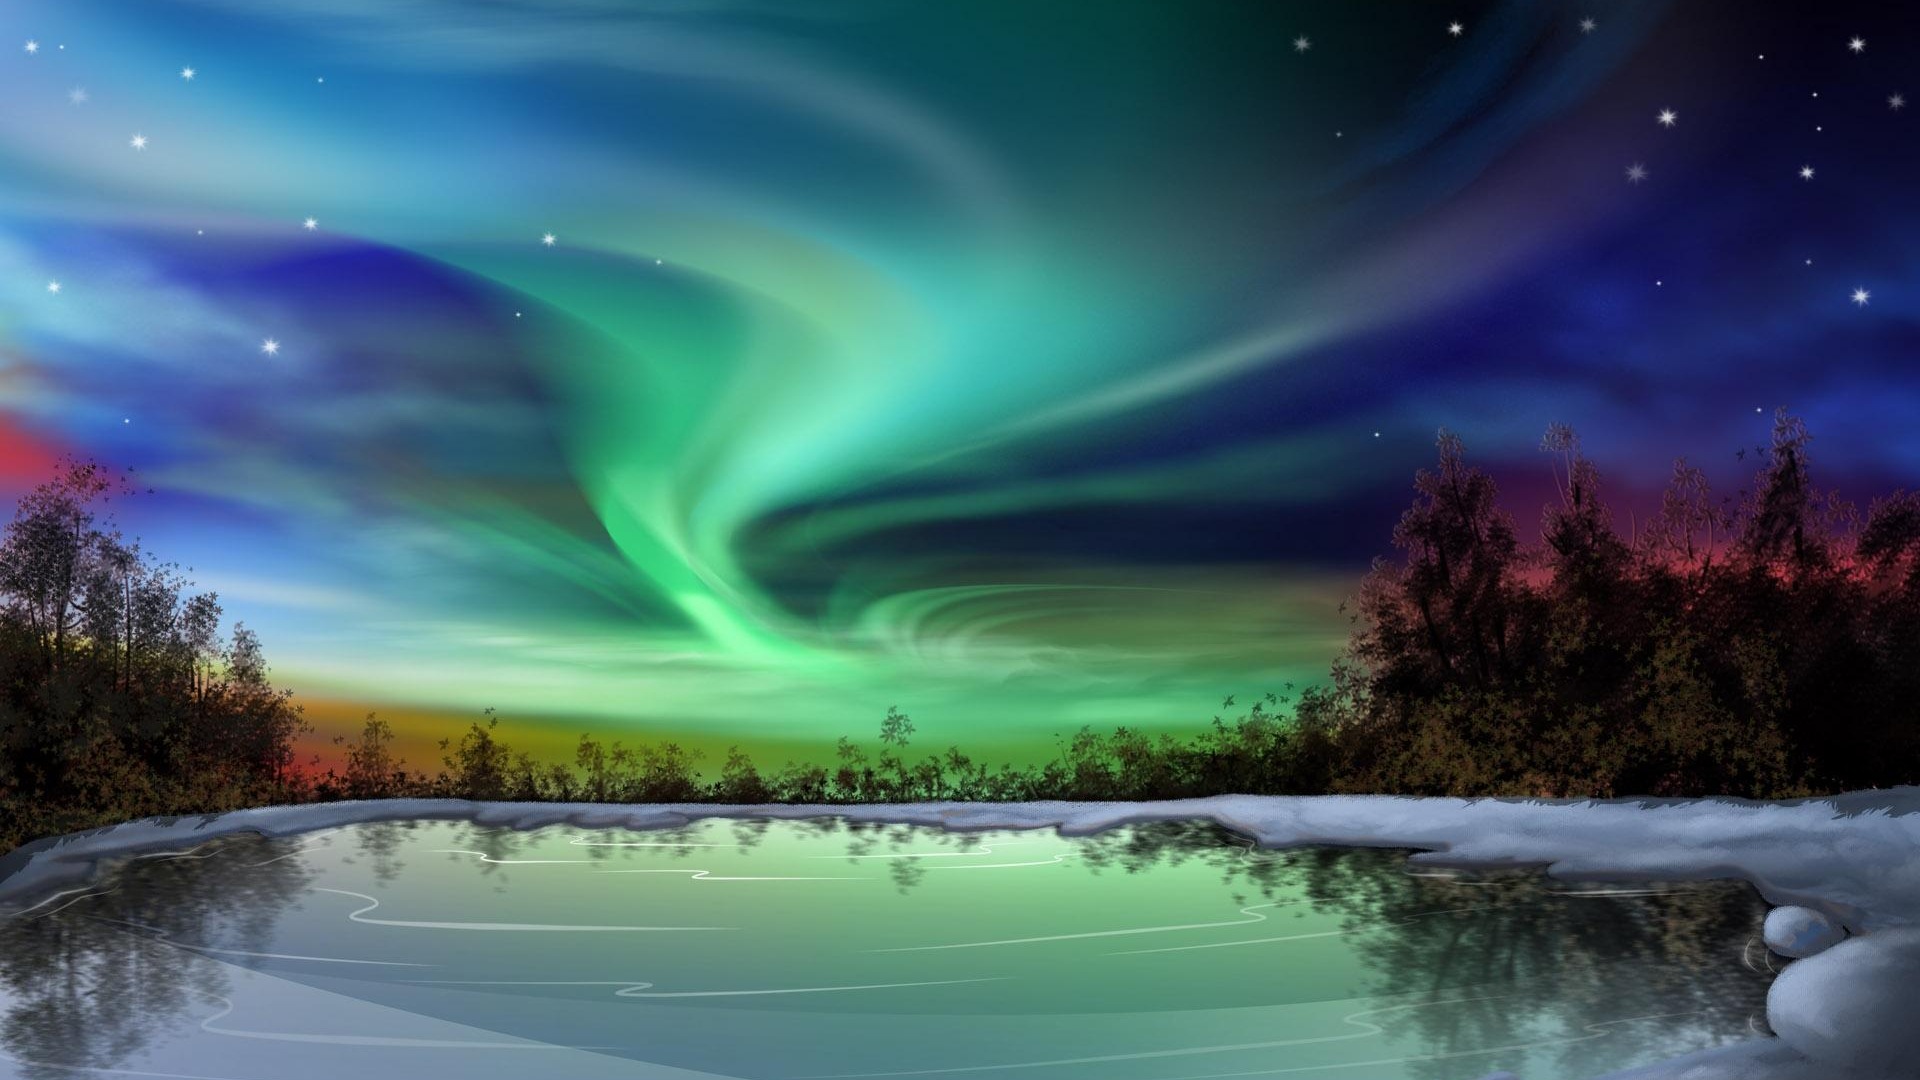 Natural wonders of the Northern Lights HD Wallpaper (2) #25 - 1920x1080